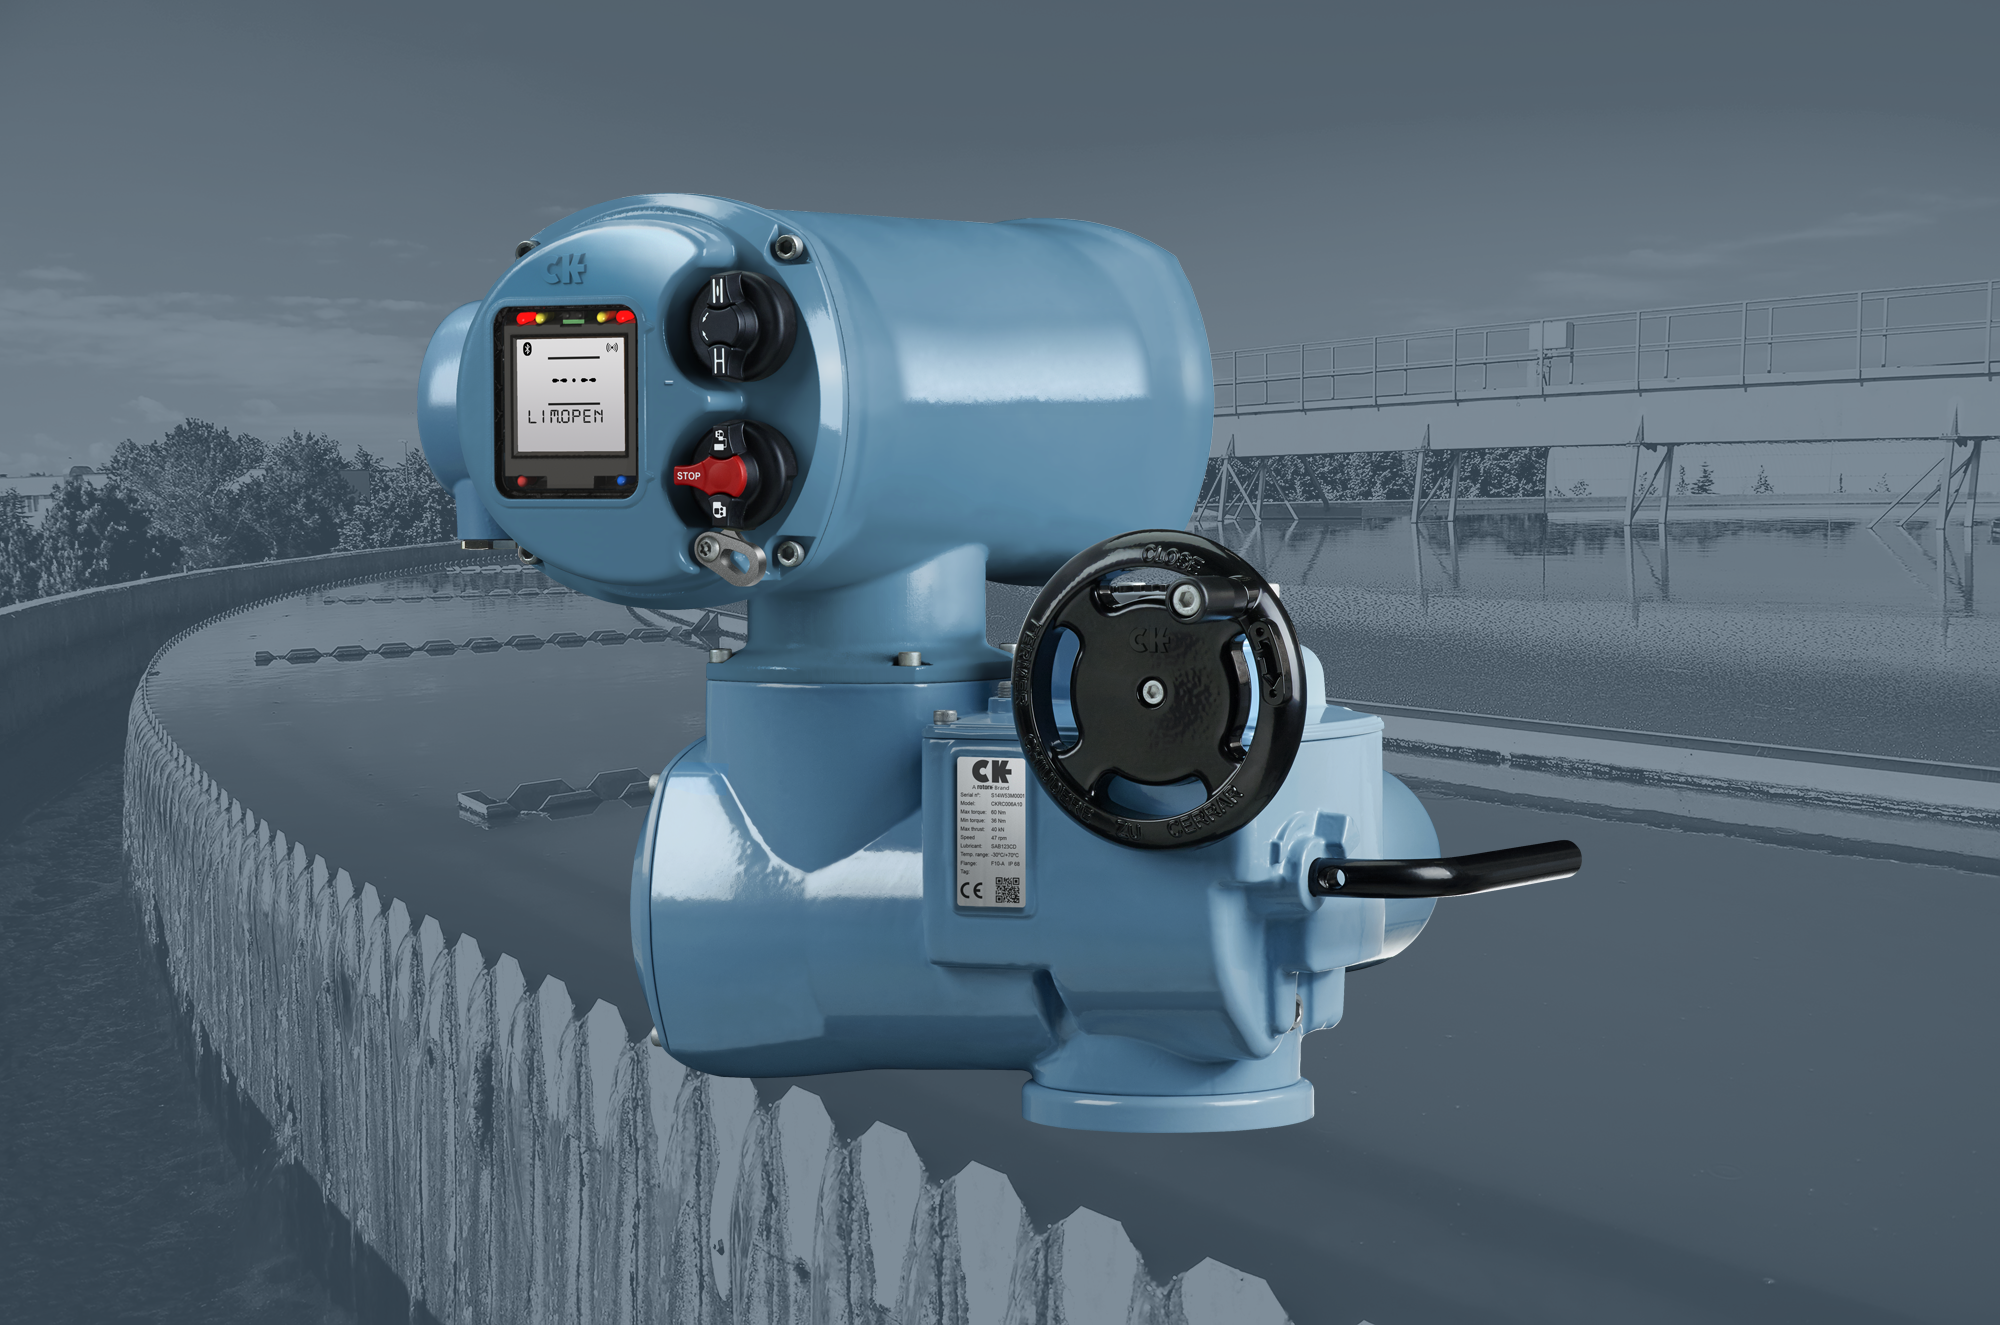 Over 700 of Rotork’s CK modular electric actuators have been installed at the Shantou wastewater treatment plant in Guangdong, southern China.